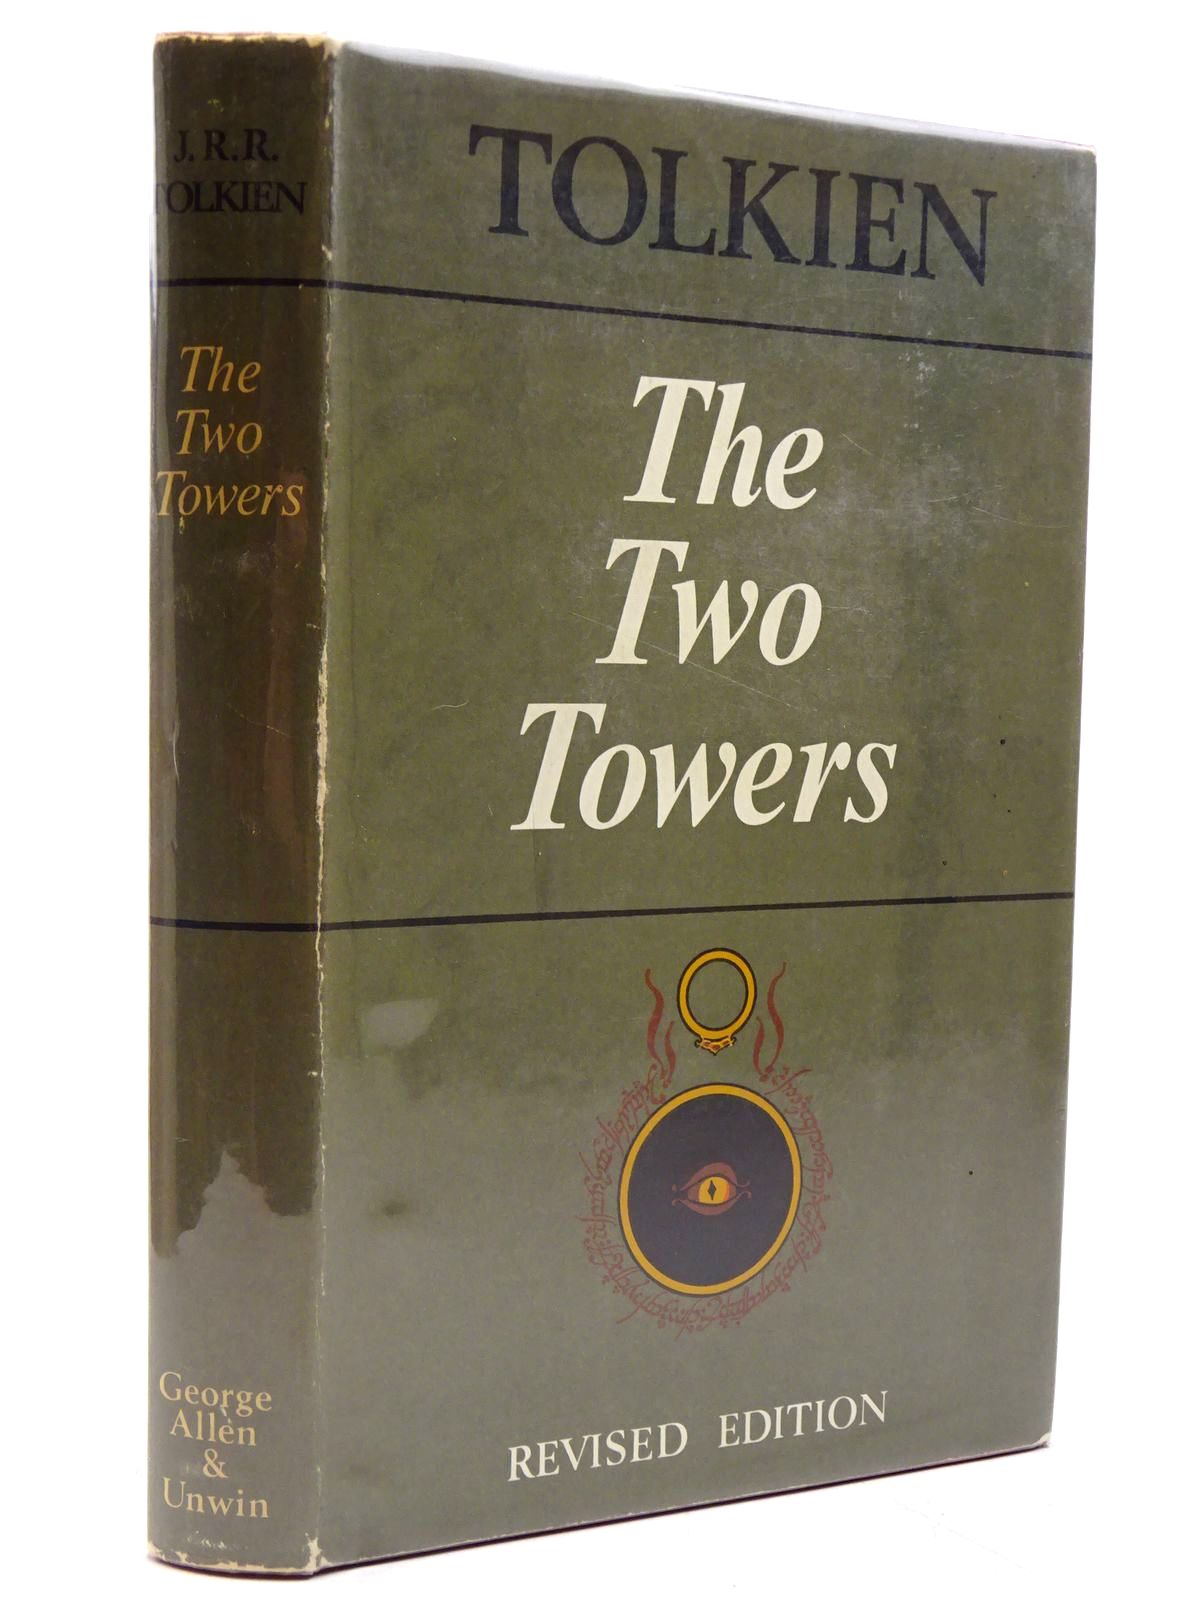 TOLKIEN, J.R.R. - The Two Towers